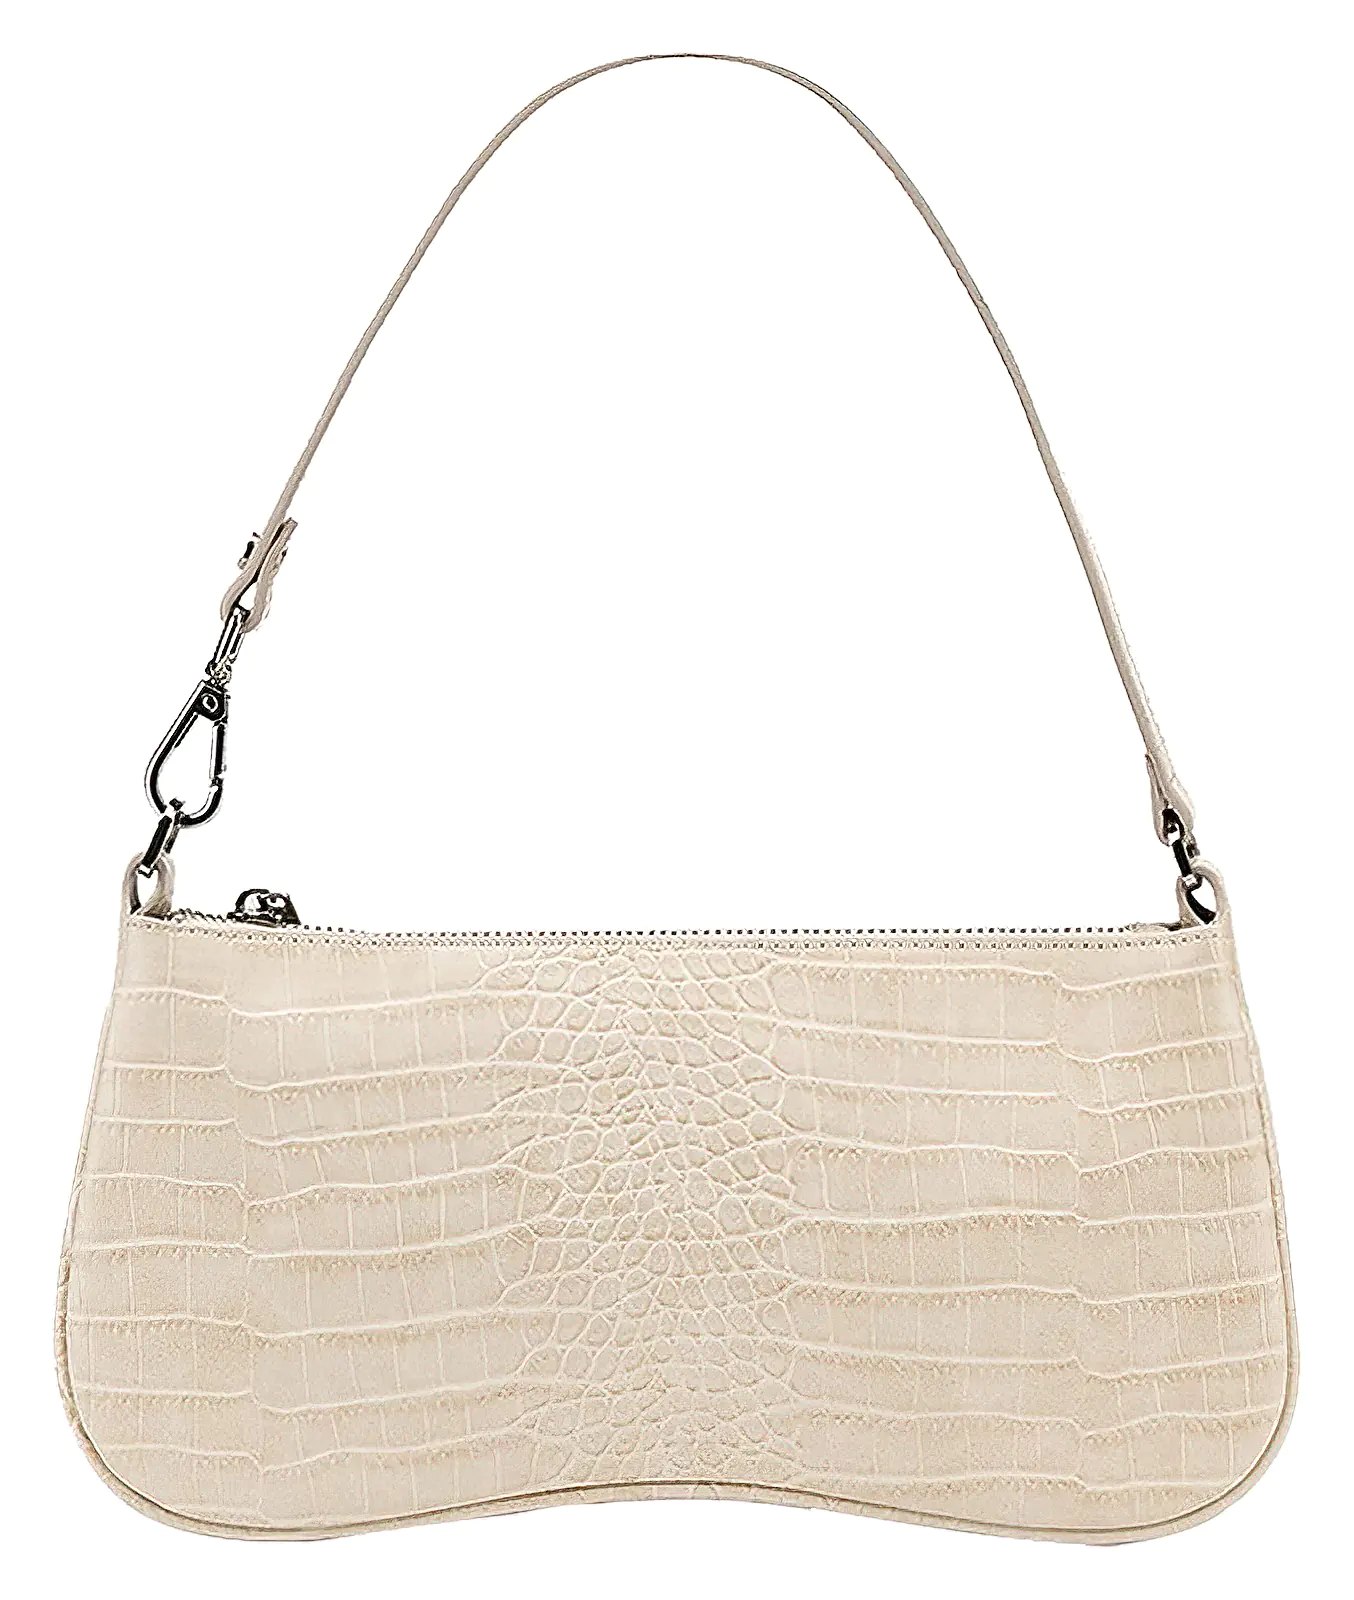 Portrait of a white leather clutch bag with a crocodile skin texture